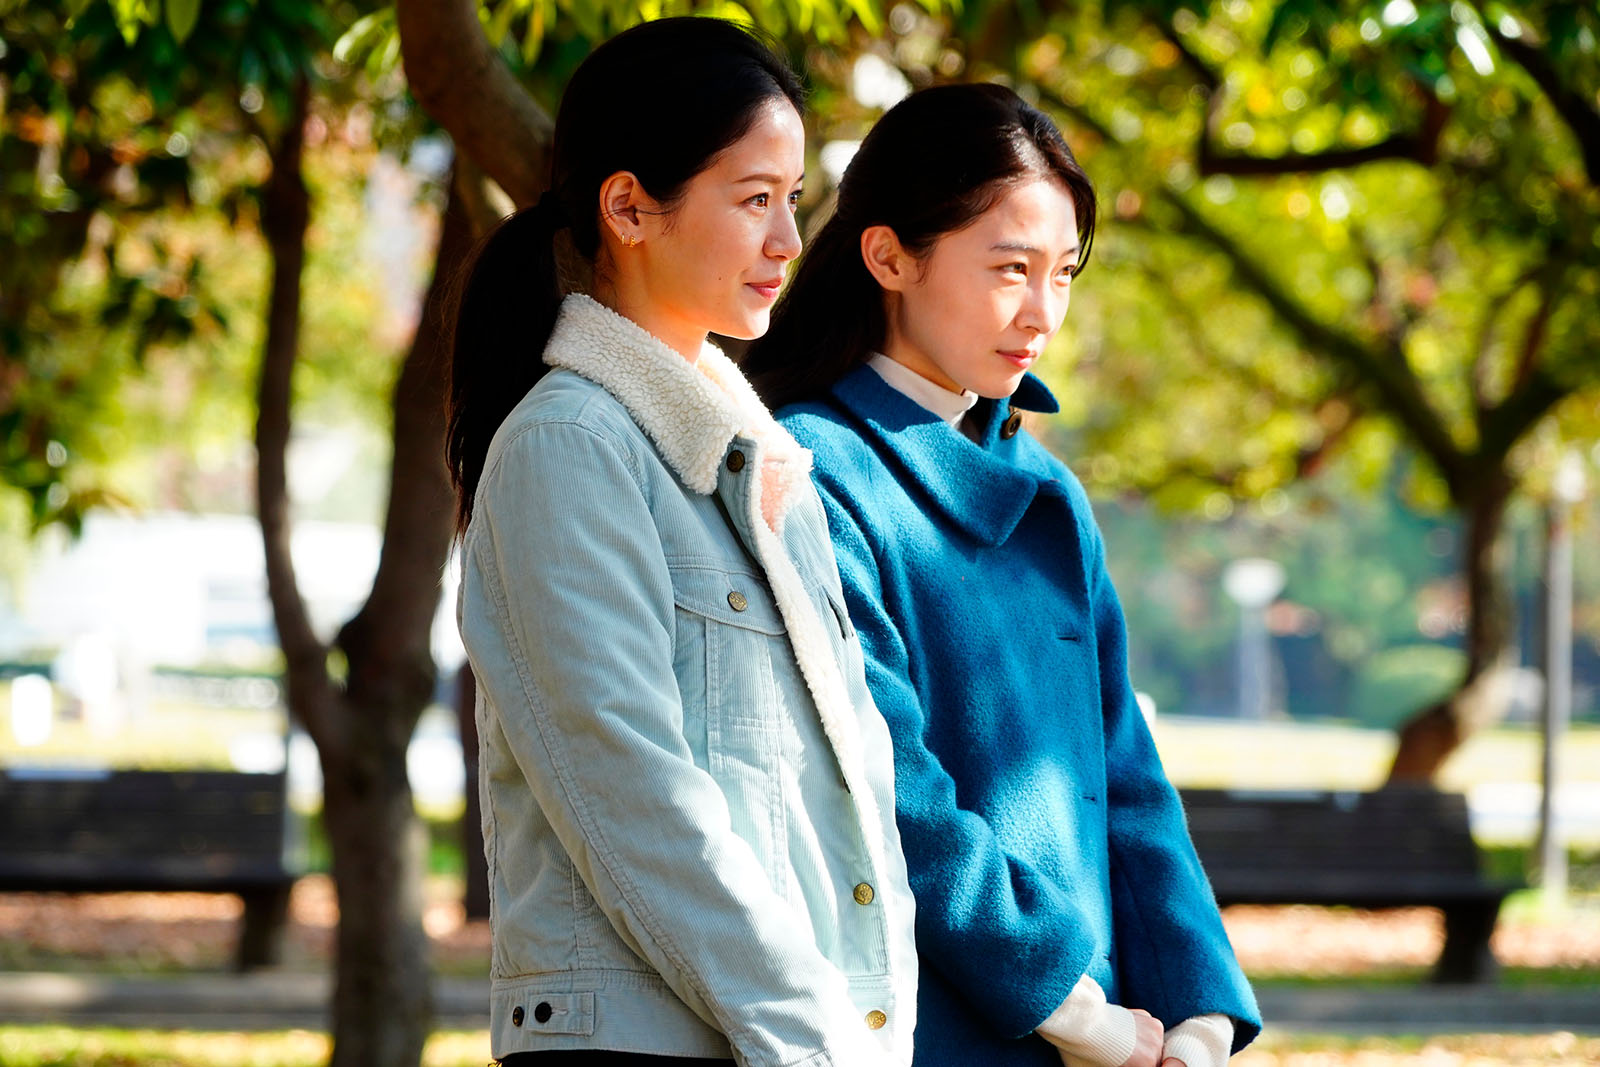 Sonia Yuan as Janice Chang (L) and Park Yu-rim as Lee Yoon-a (R) in Drive My Car. Image © Bitters End